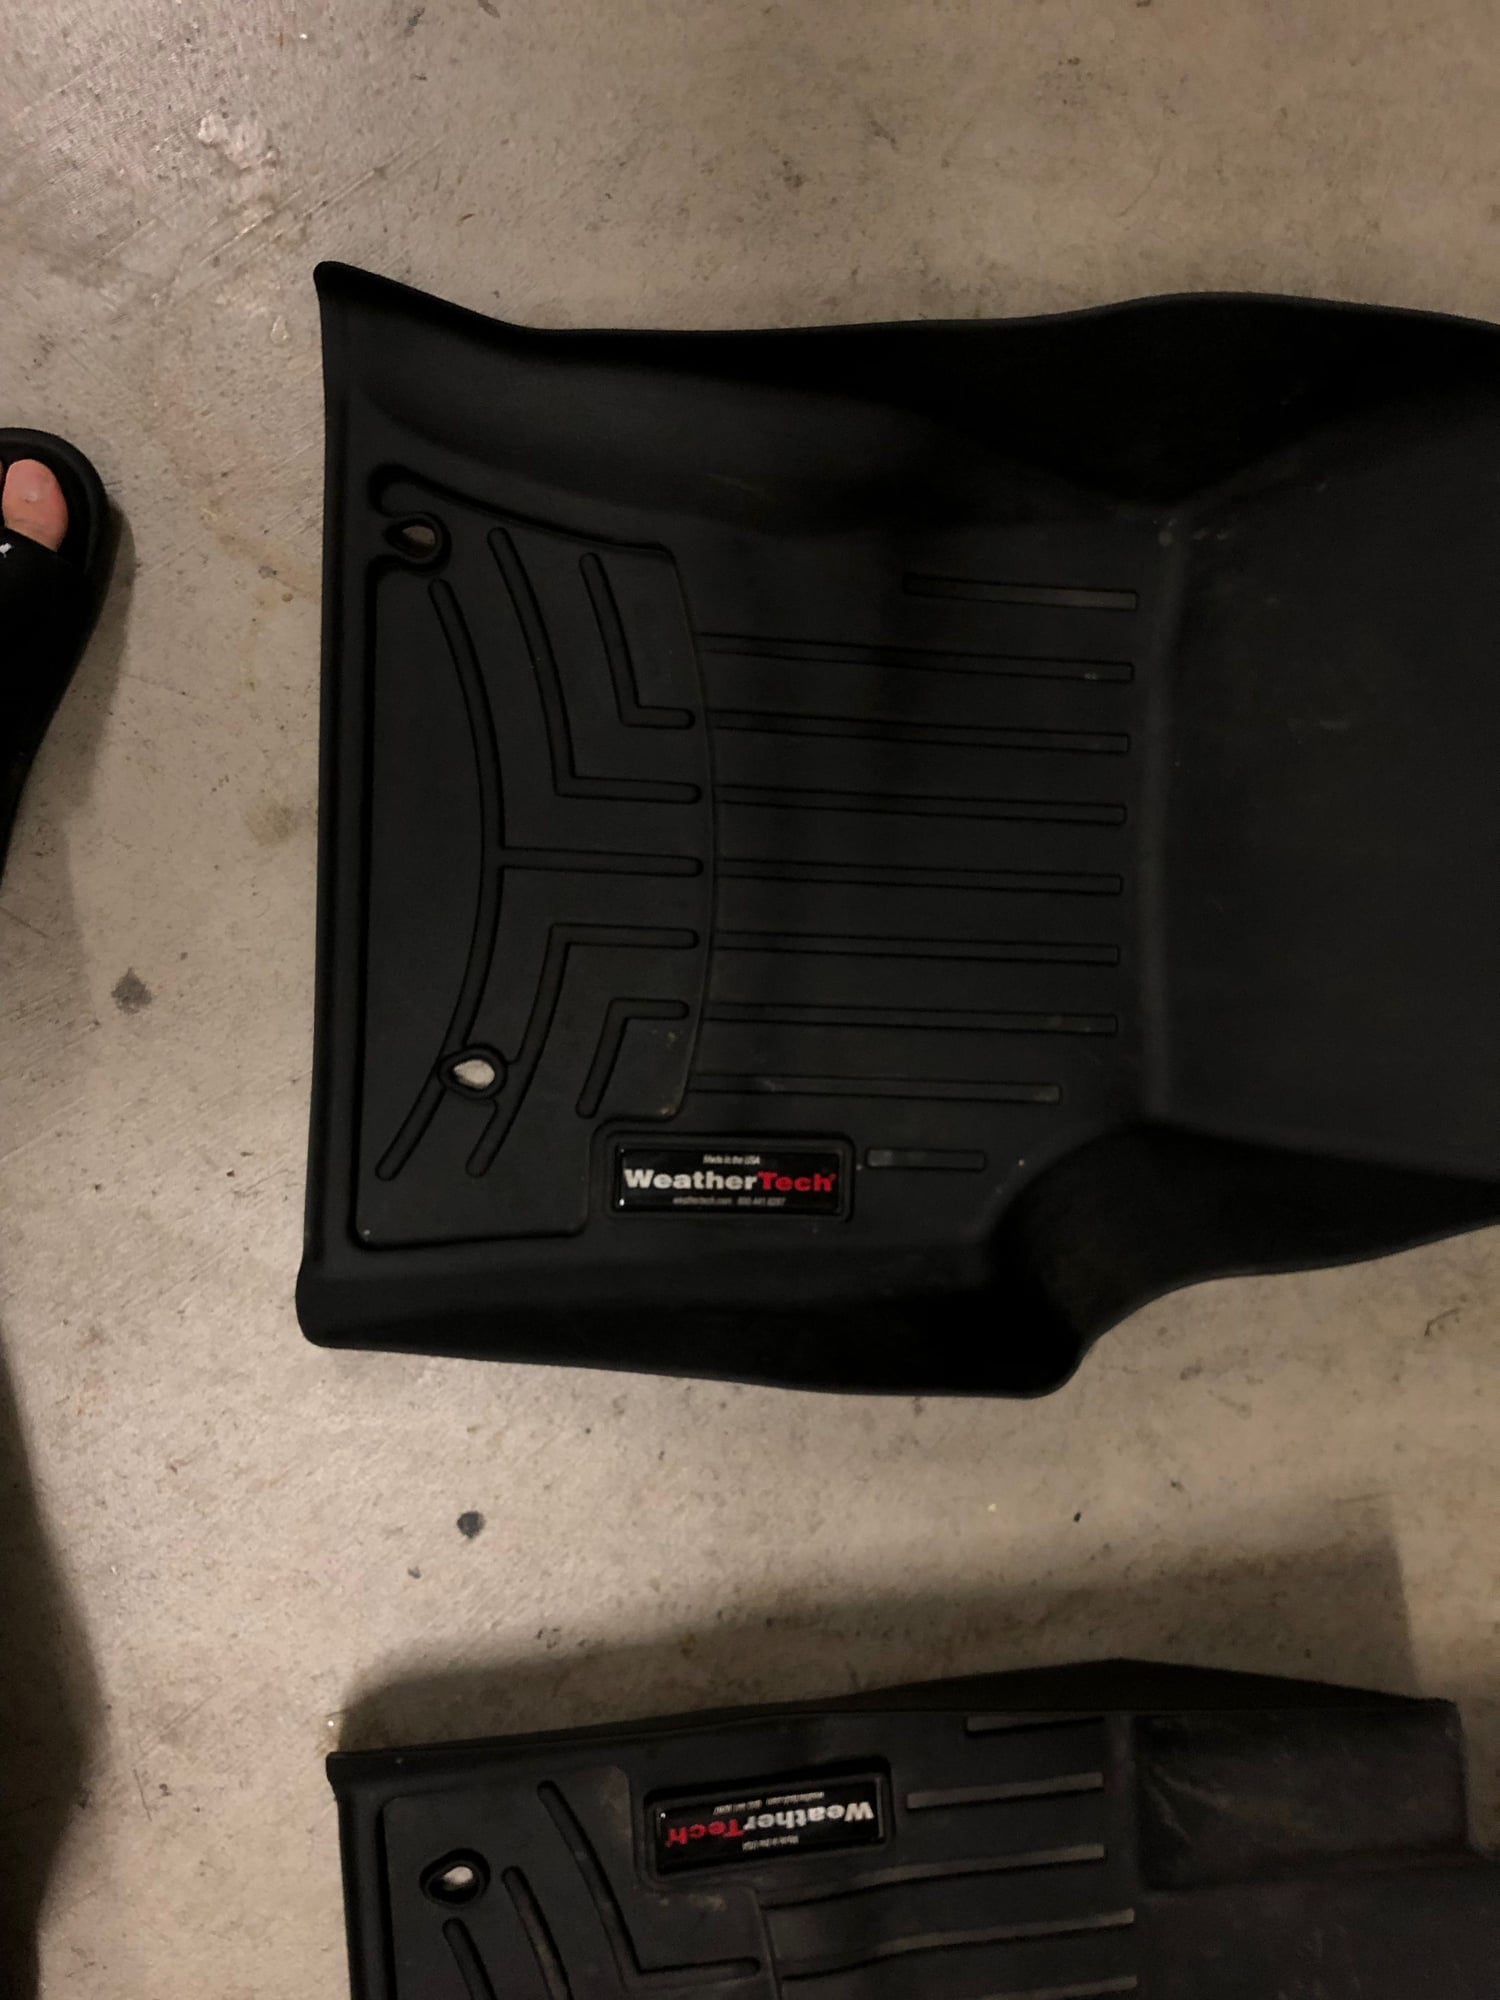 Accessories - Weather tech floor mats for XE - Used - 2018 to 2024 Jaguar XE - Palo Alto, CA 94306, United States